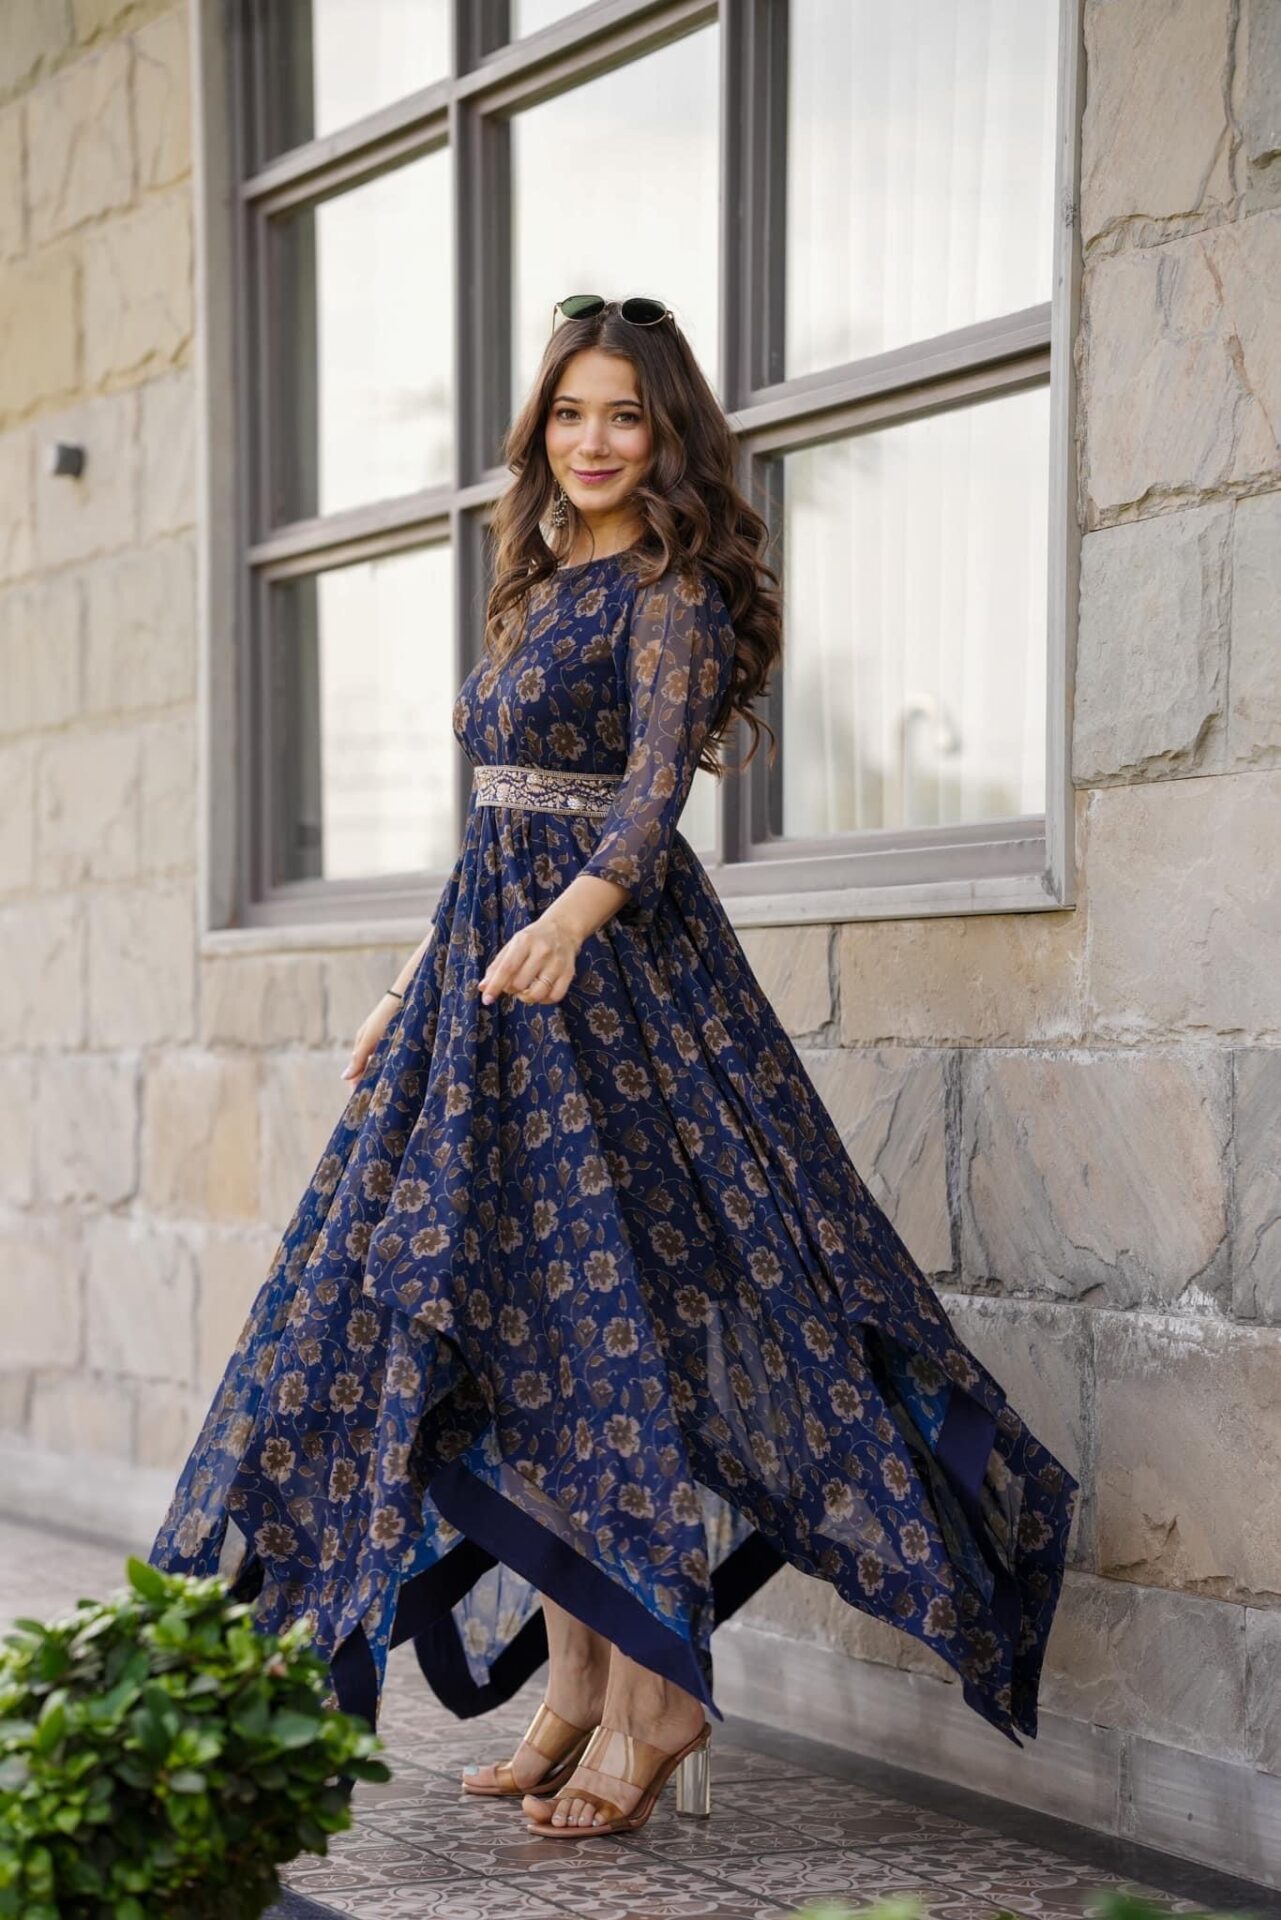 Occasion Dresses | Evening & Going Out Dresses | NADINE MERABI